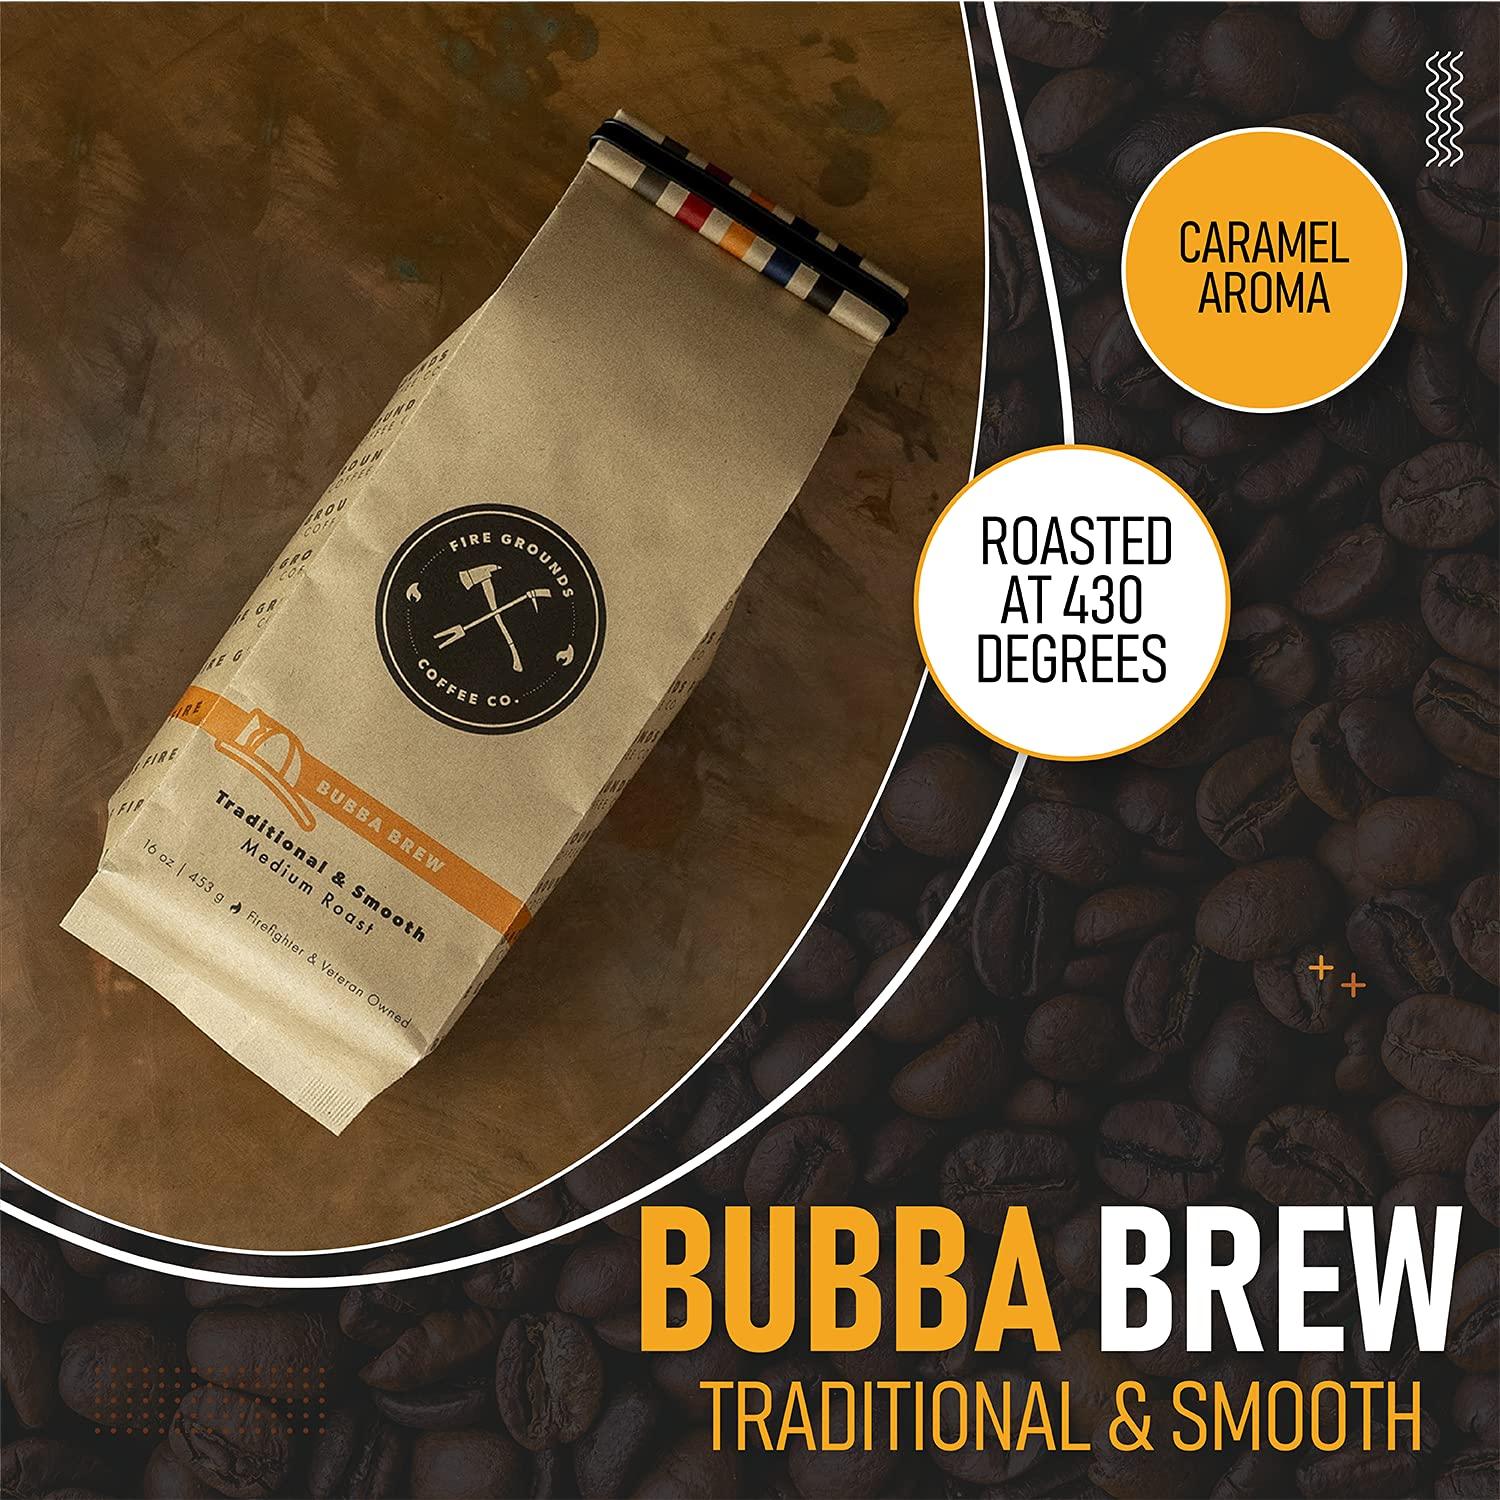 Bubba Brew (Medium Roast) by Fire Grounds Coffee Company - The Hammer Sports